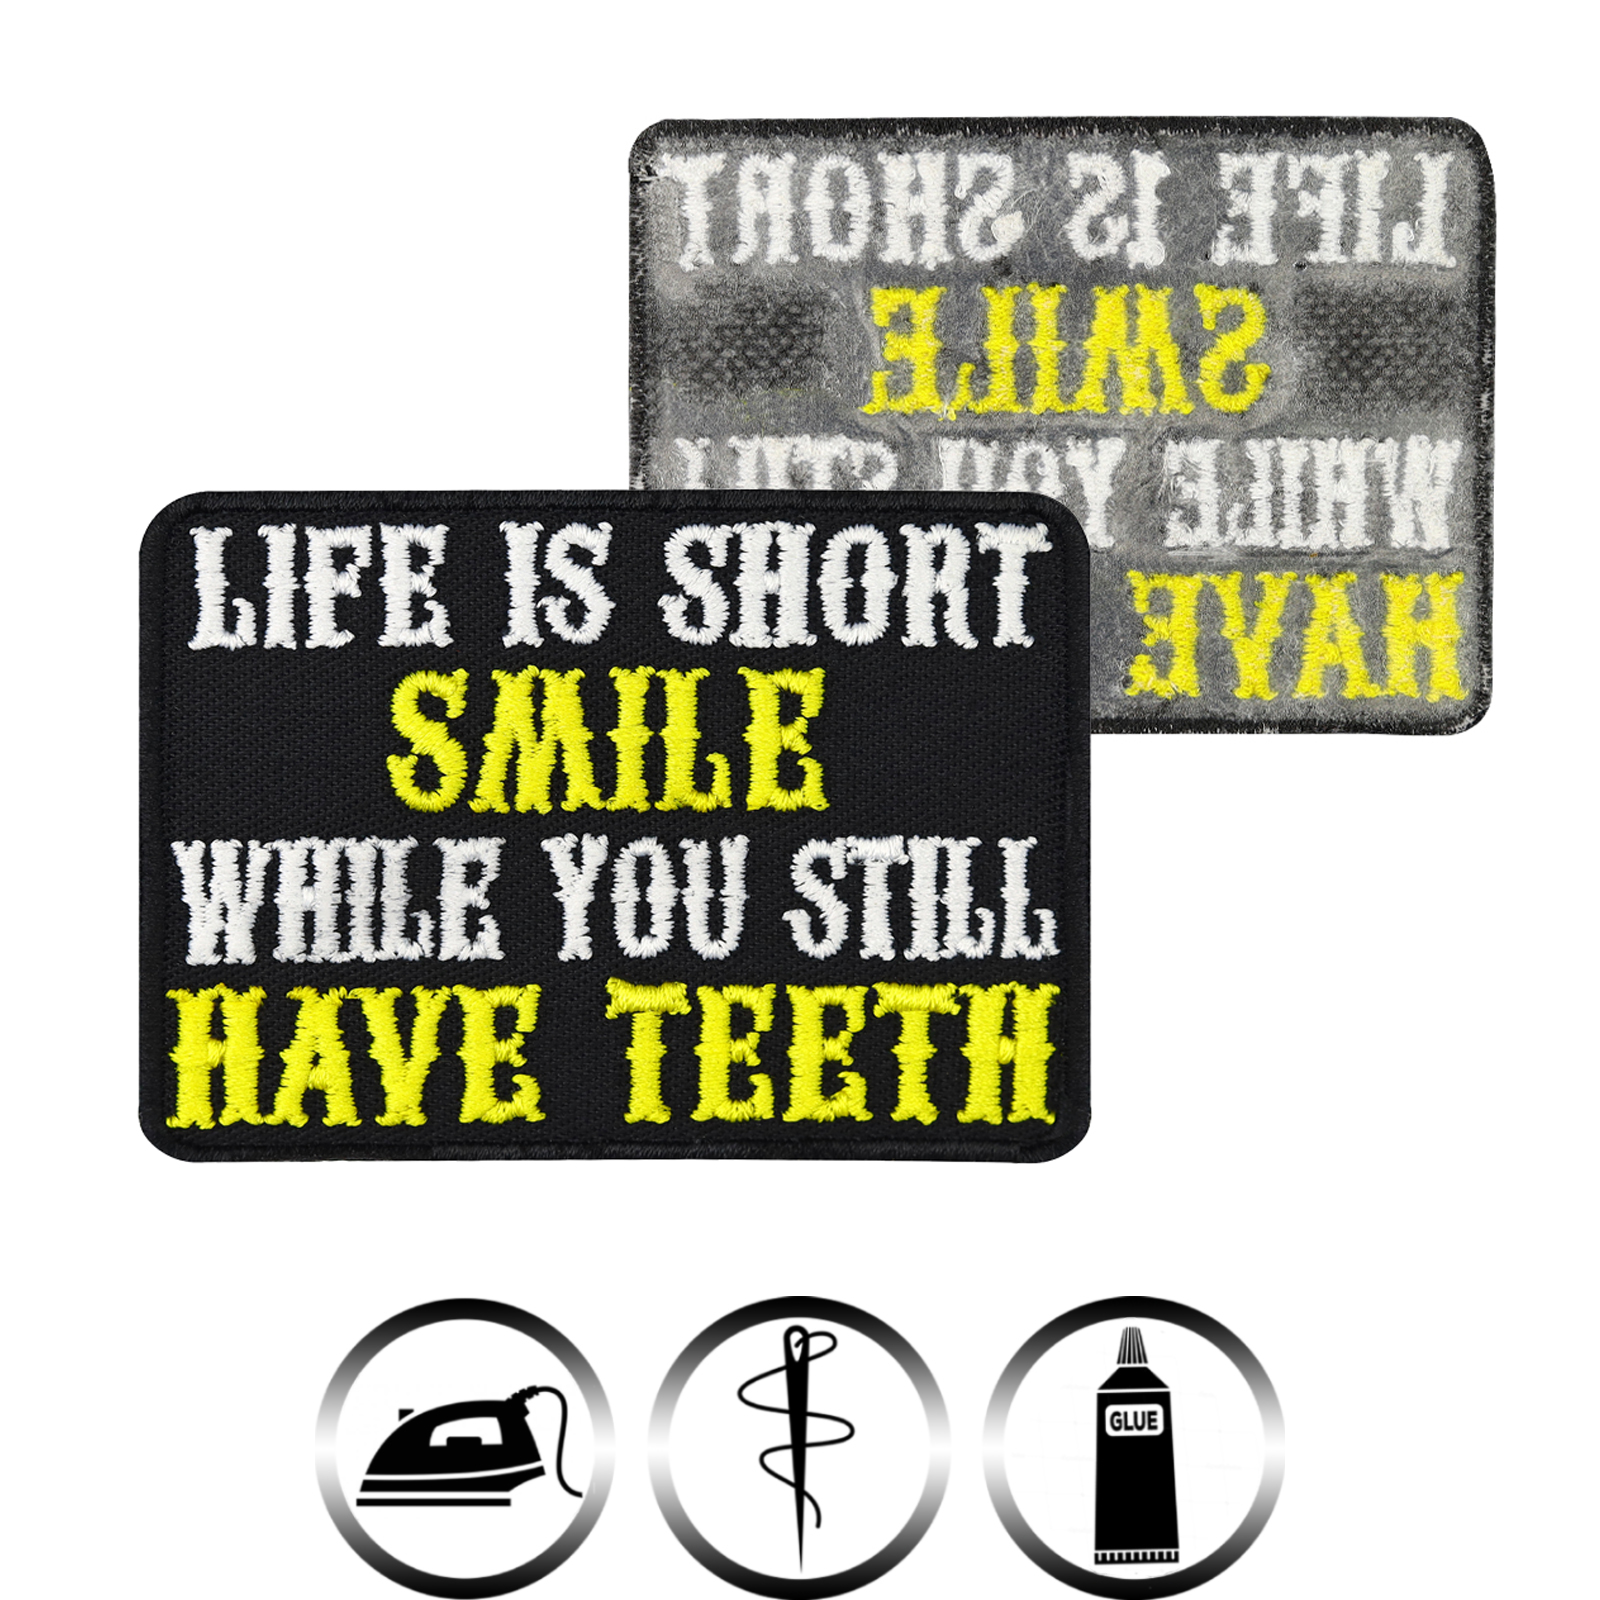 Life is short - Smile while you still have teeth. - Patch